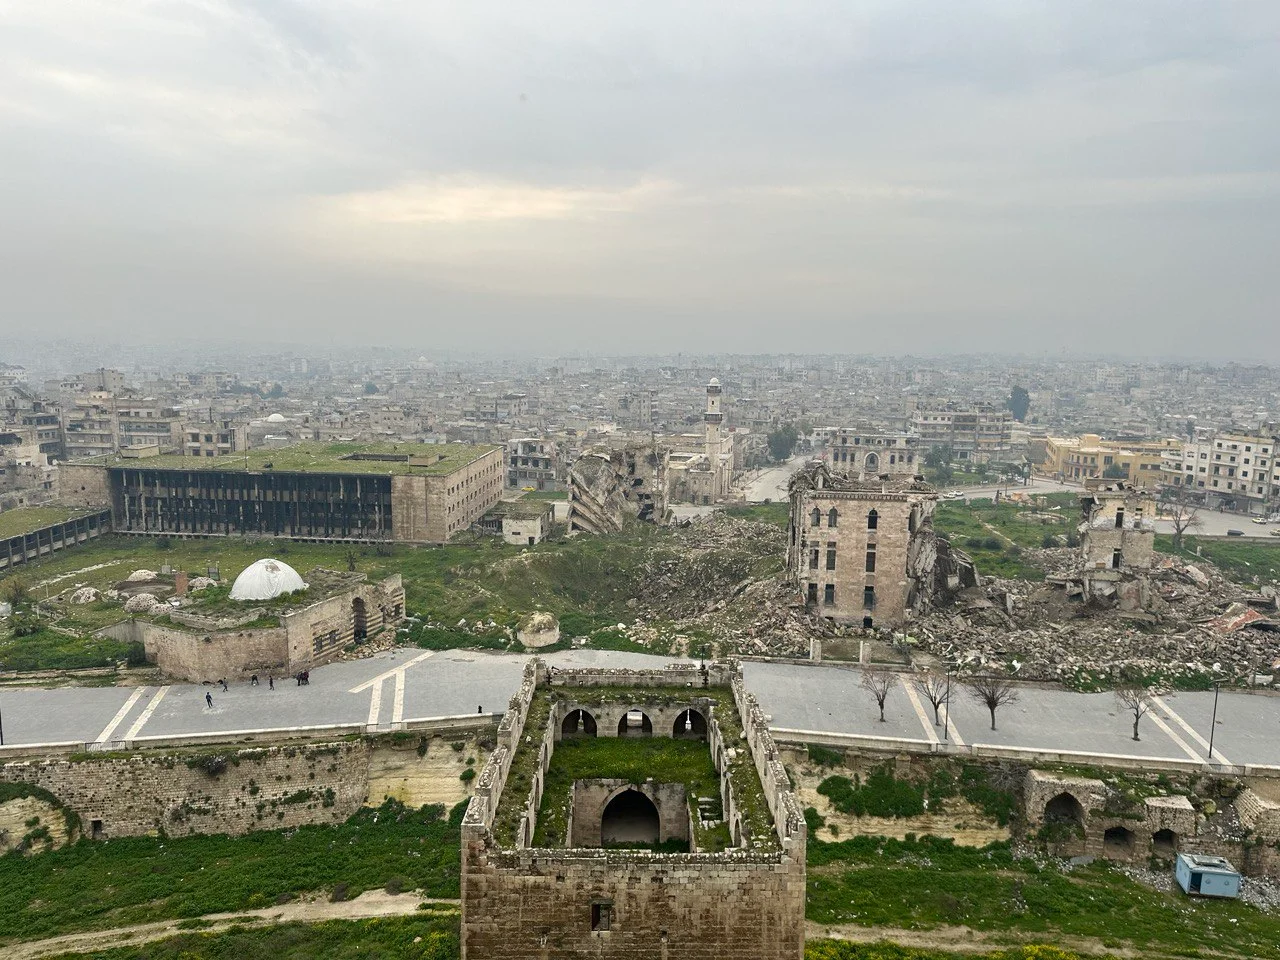 the view from Aleppo Citadel